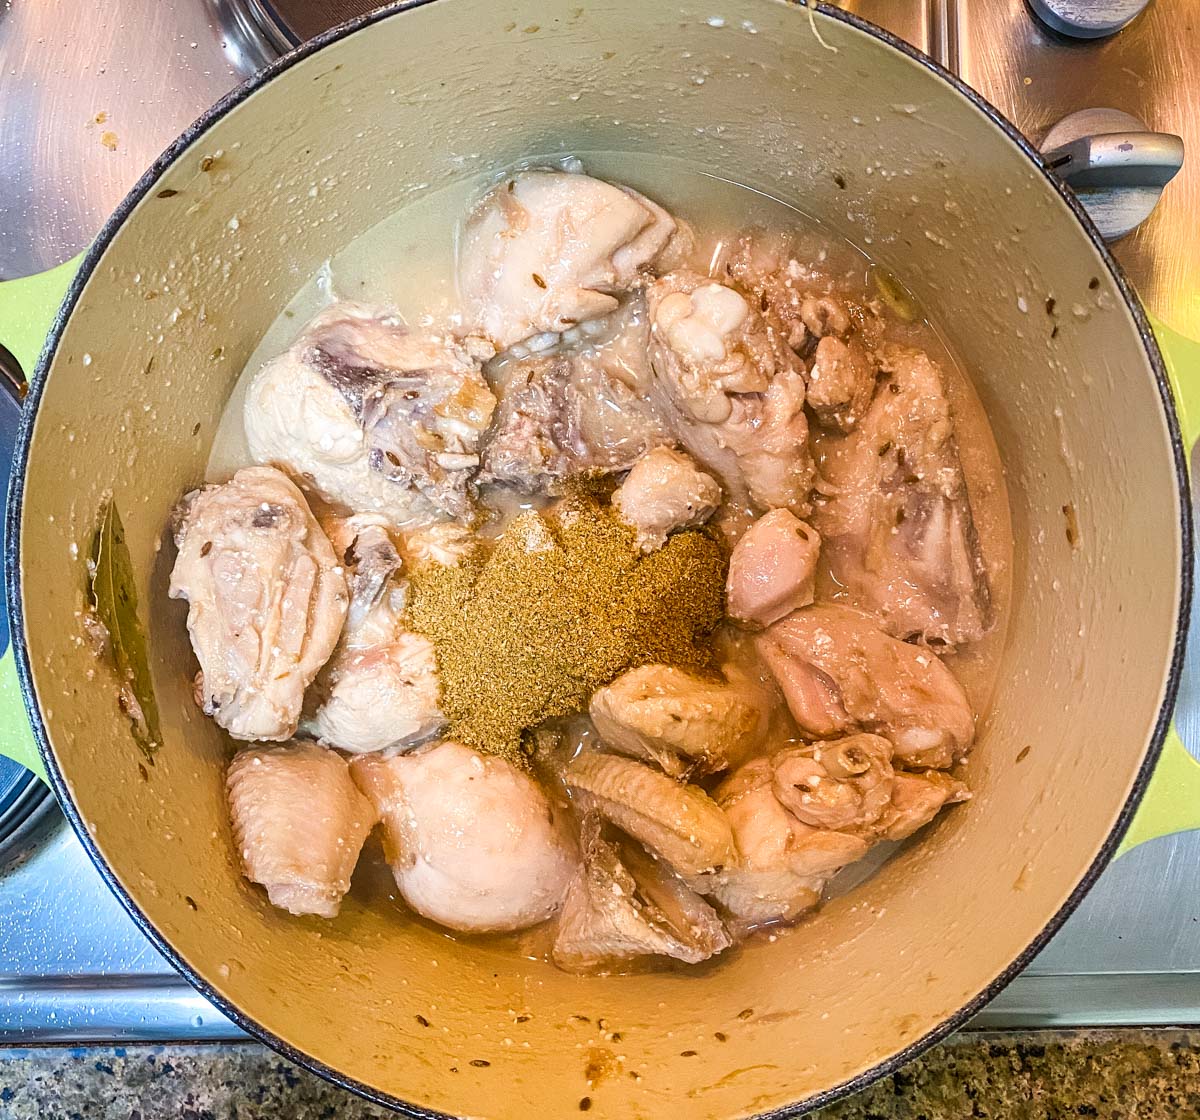 Powdered spices added to cooked chicken in a pot.